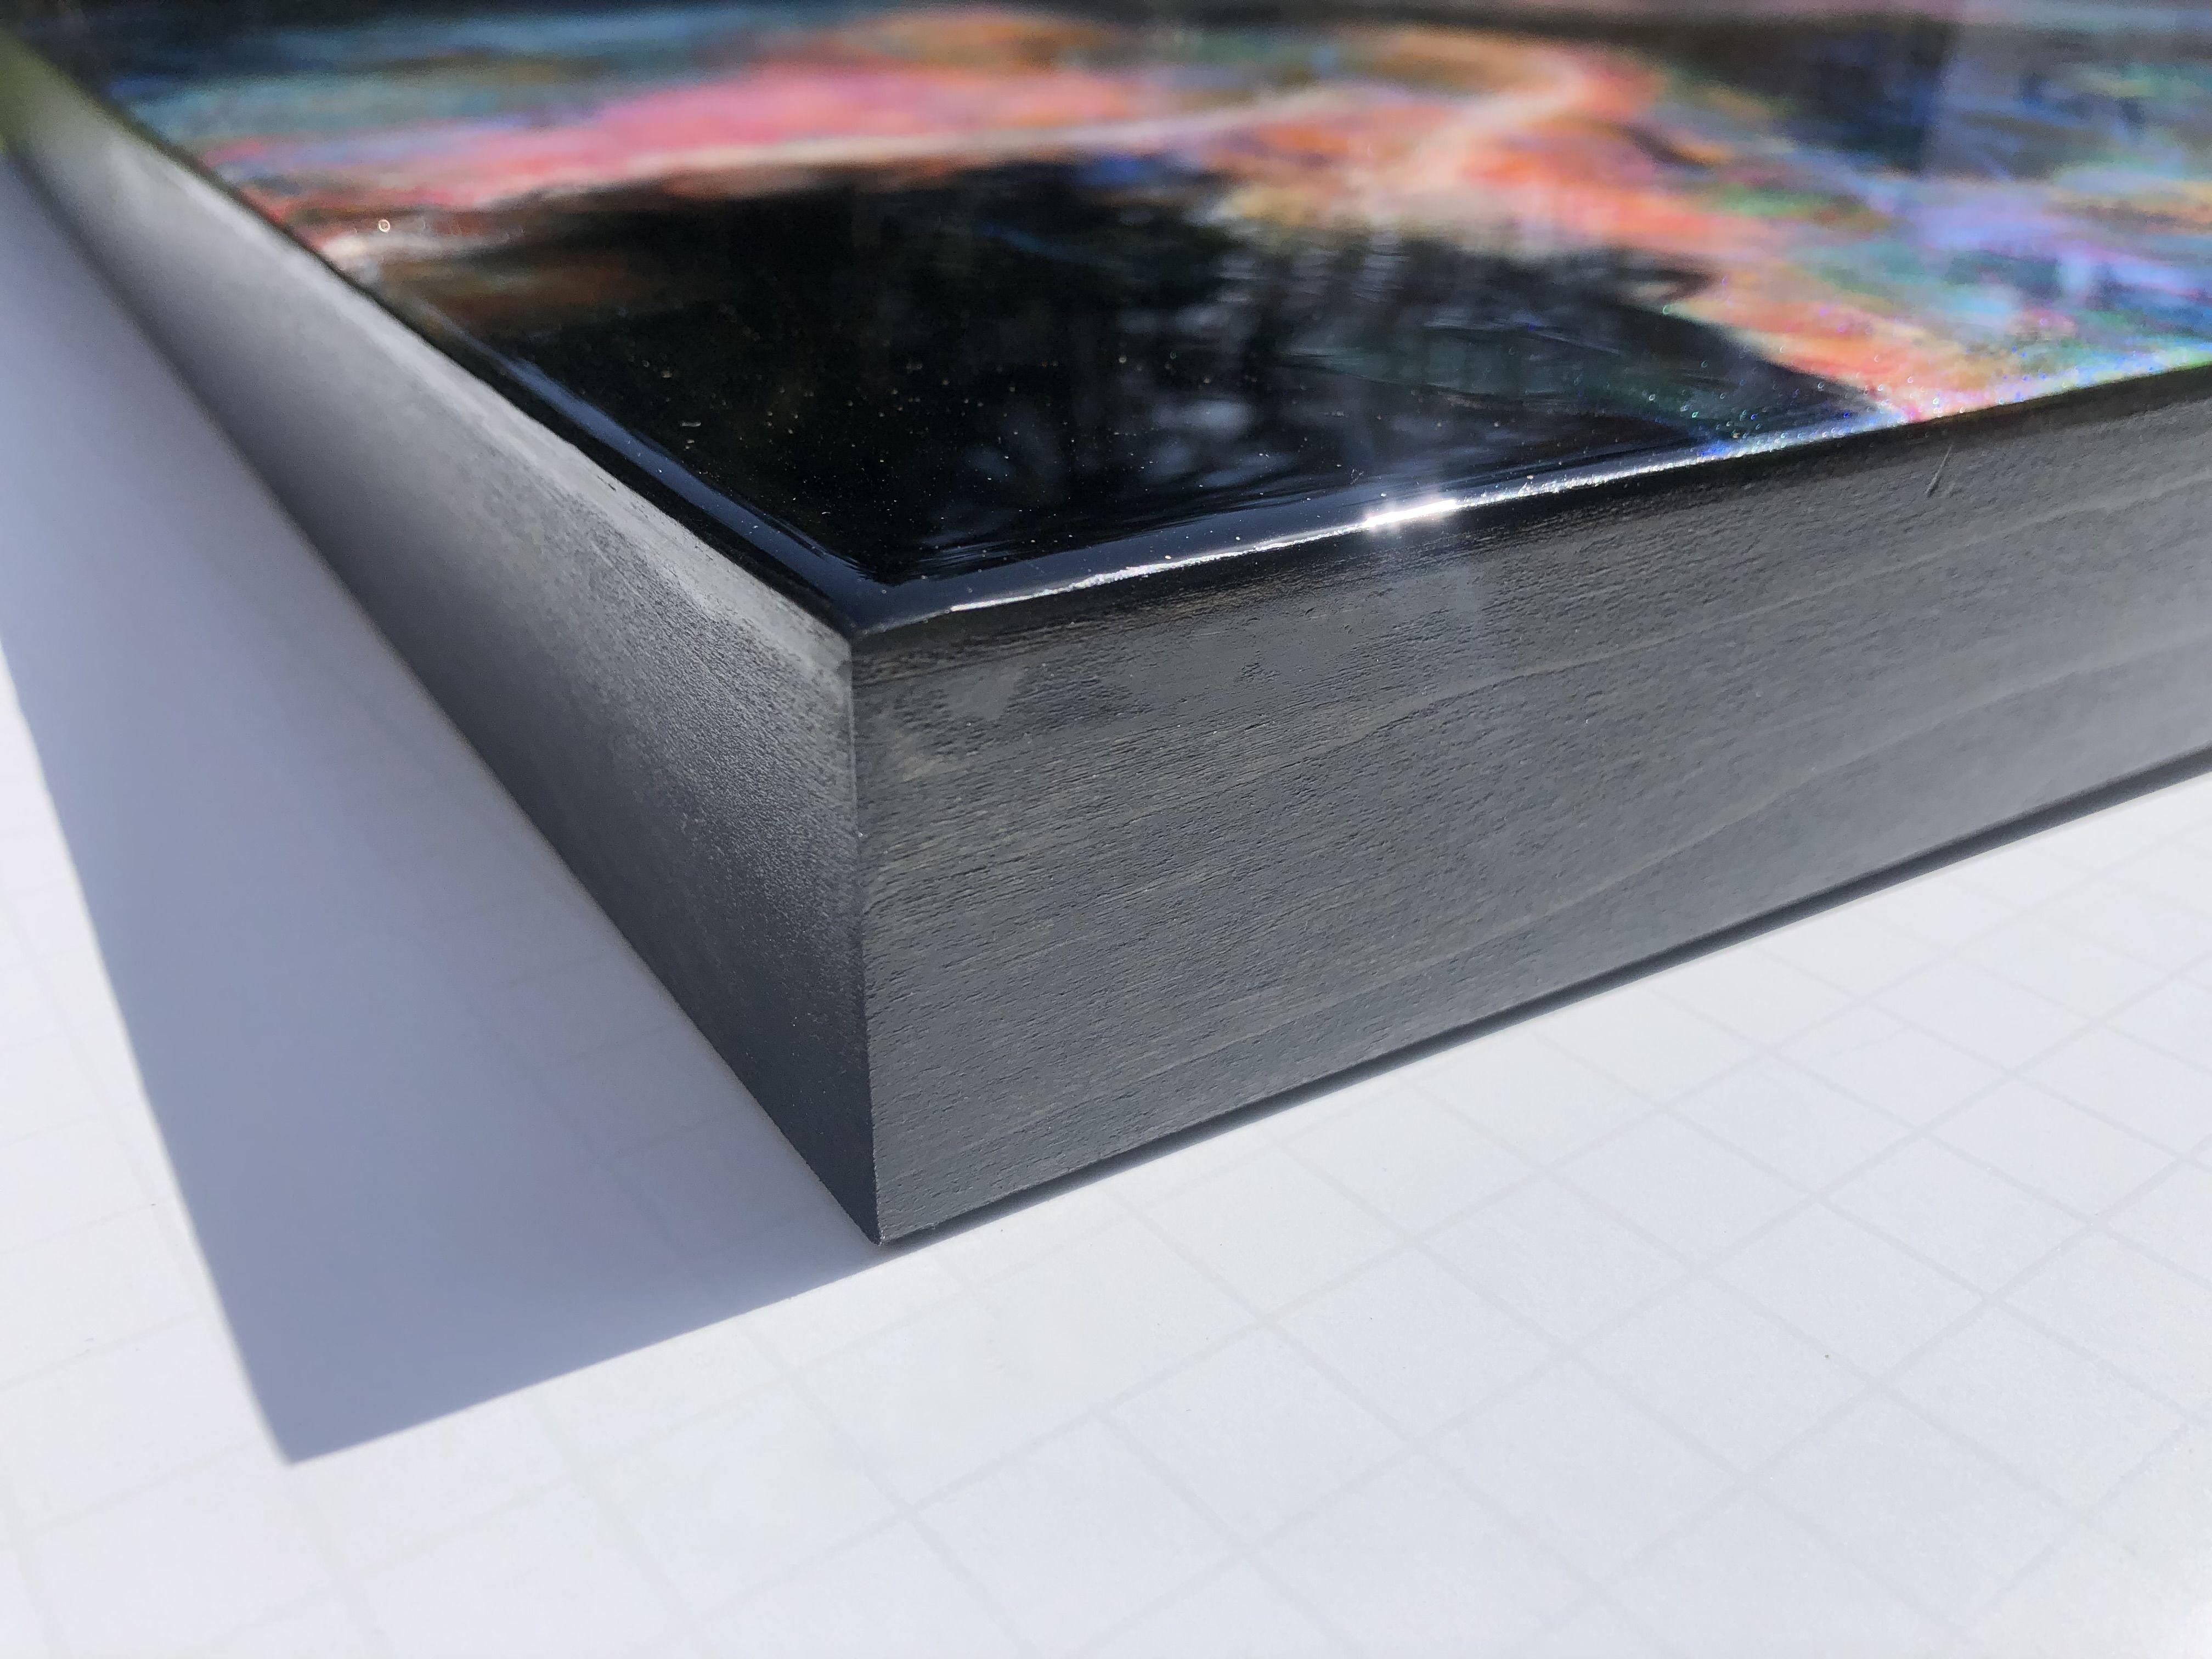 Tiffani employed her holographic resin painting technique to create the ELURIA NEBULA, a stunningly vibrant piece of resin art that captures the imagination and wonder of stargazing with its vivid colors and swirling, cosmic patterns. Like a